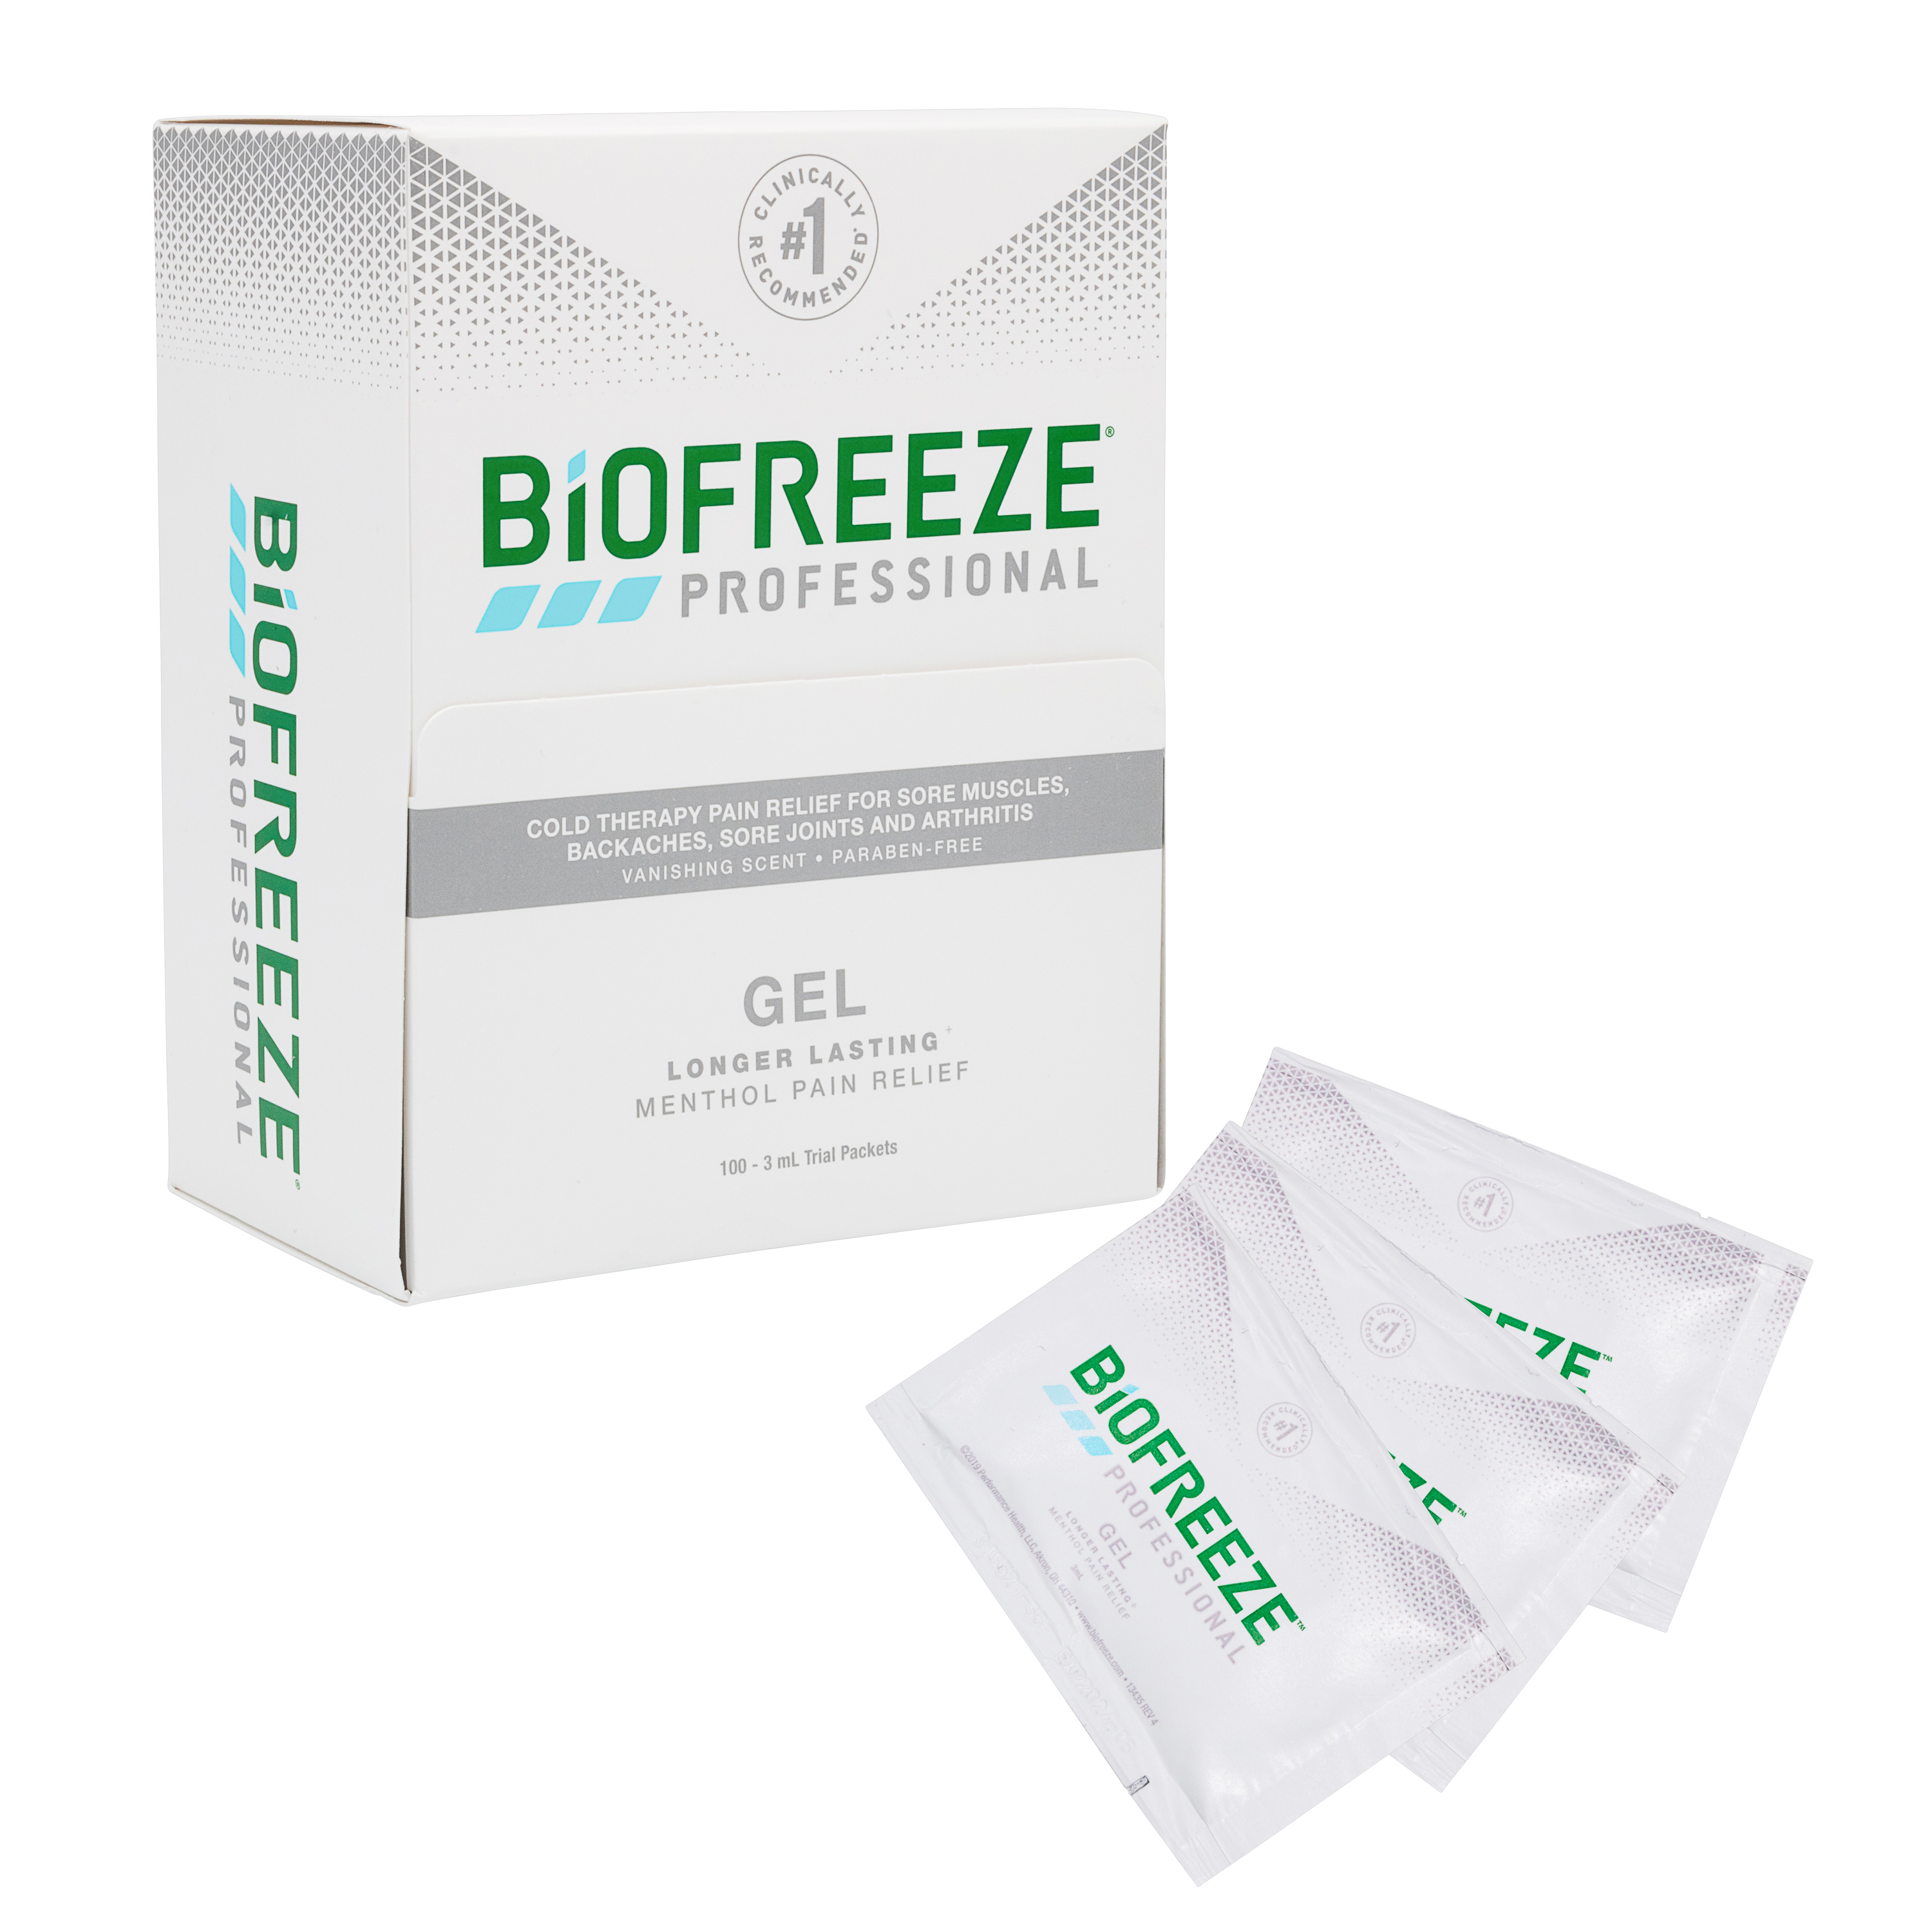 Biofreeze Pro Pain Relieving Gel - 16 oz. Spray Pump - Colorless